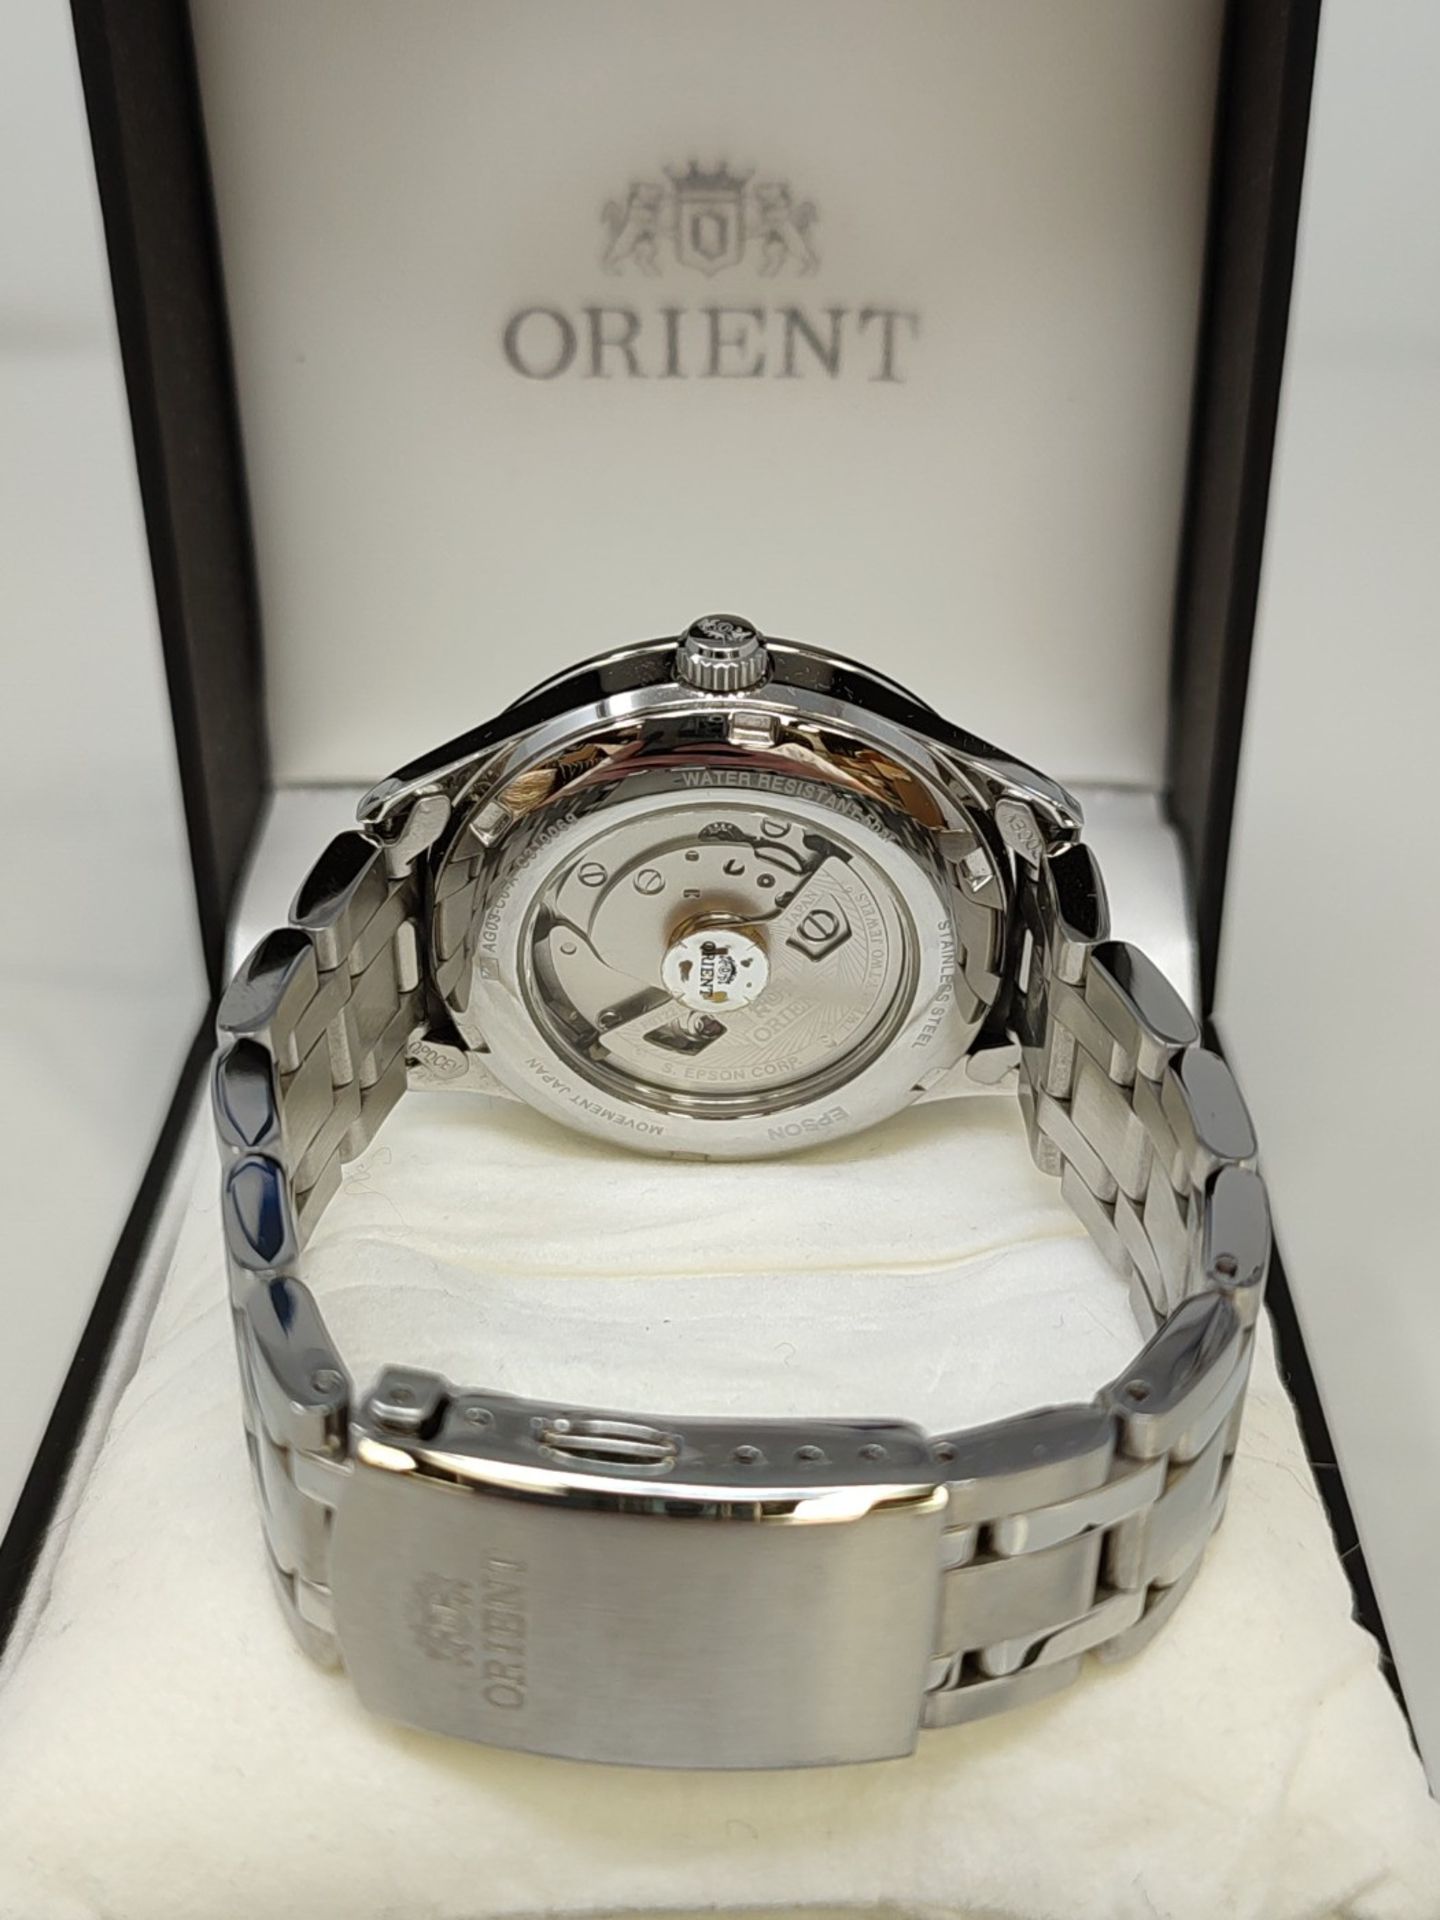 RRP £208.00 ORIENT Men's Analog Automatic Watch with Stainless Steel Bracelet FAG03001B0. - Image 3 of 3